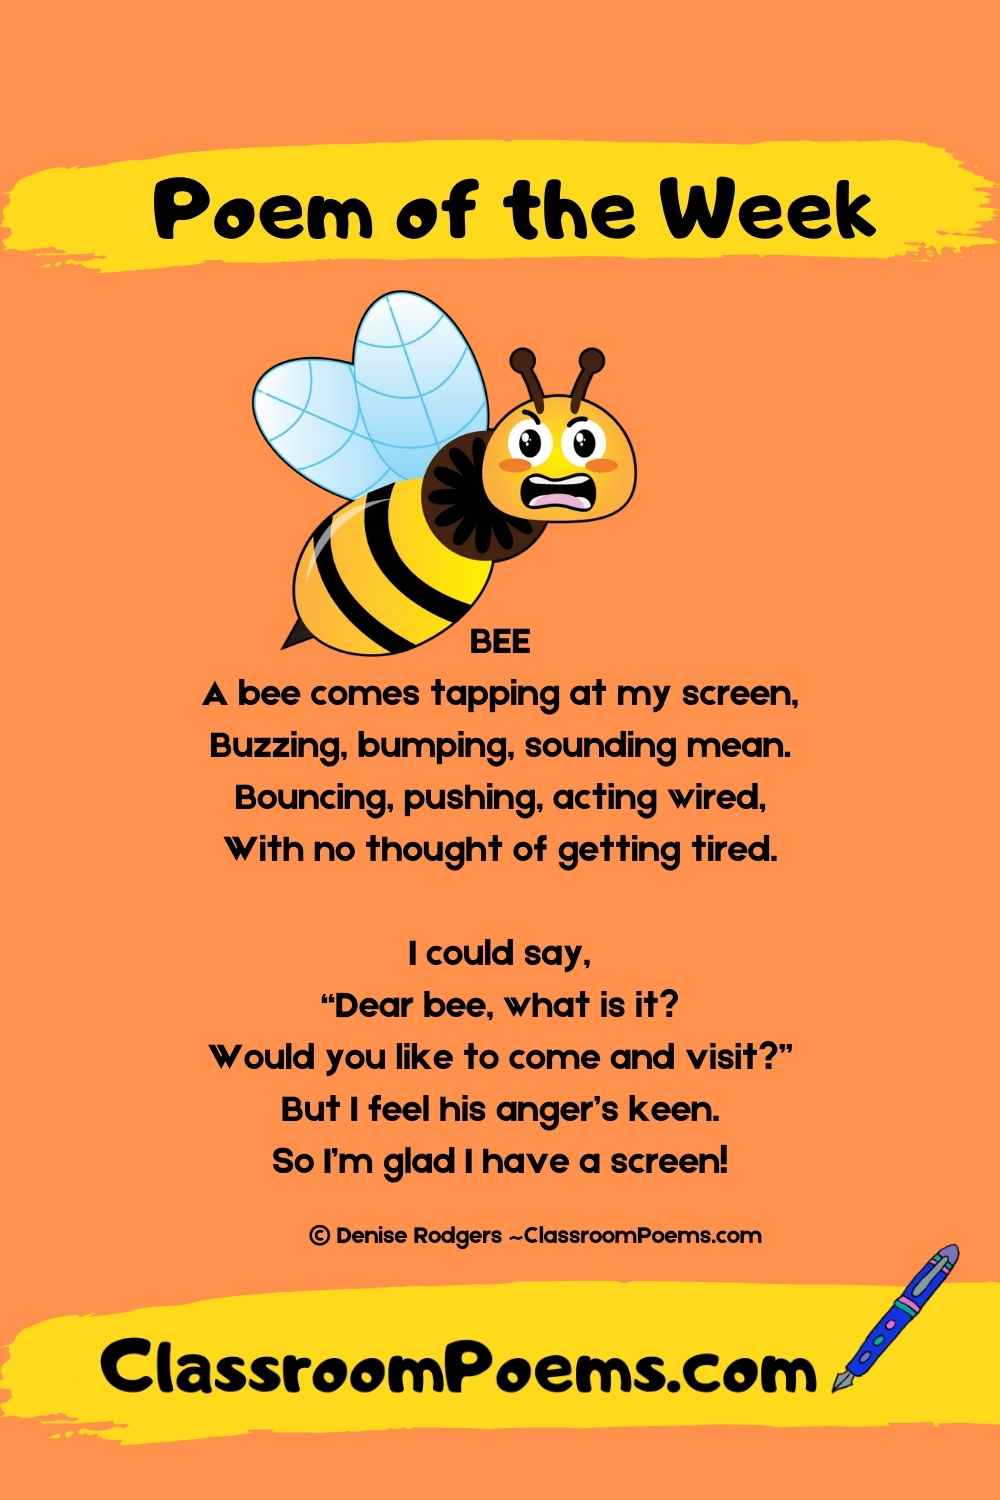 BEE, a funny poem for kids by Denise Rodgers on ClassroomPoems.com.